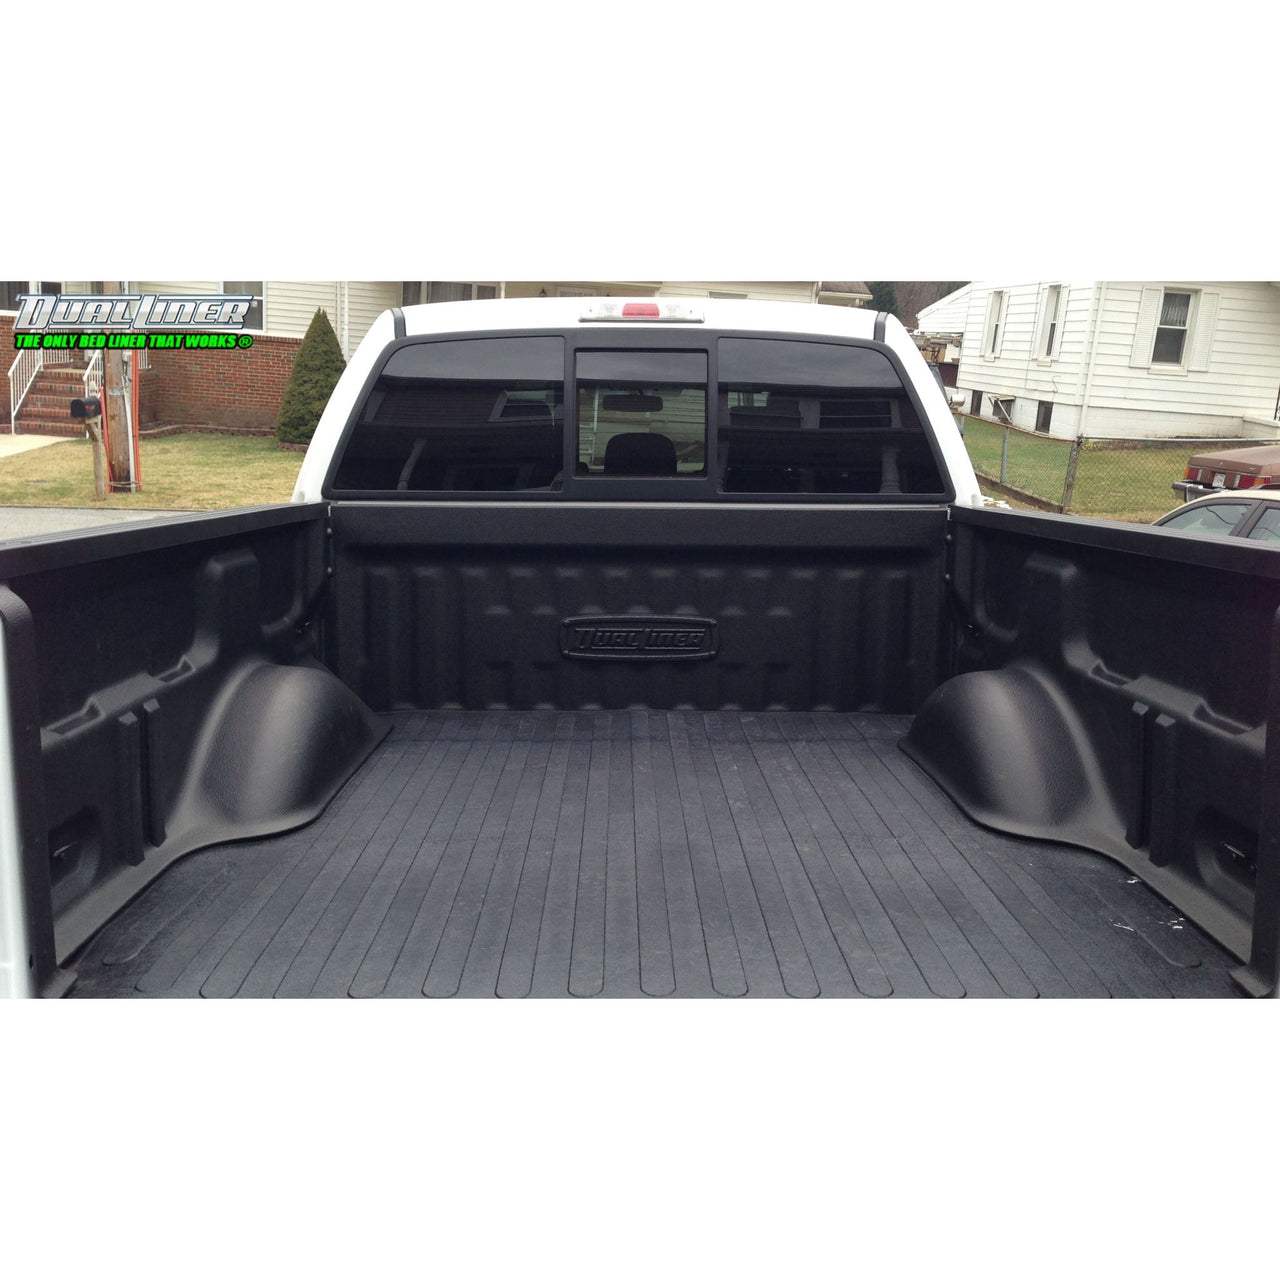 DualLiner 2021 to 2022 F-150 (no LED Light Bar, WITH Tailgate Work Surface) - Regular 6.5' Bed